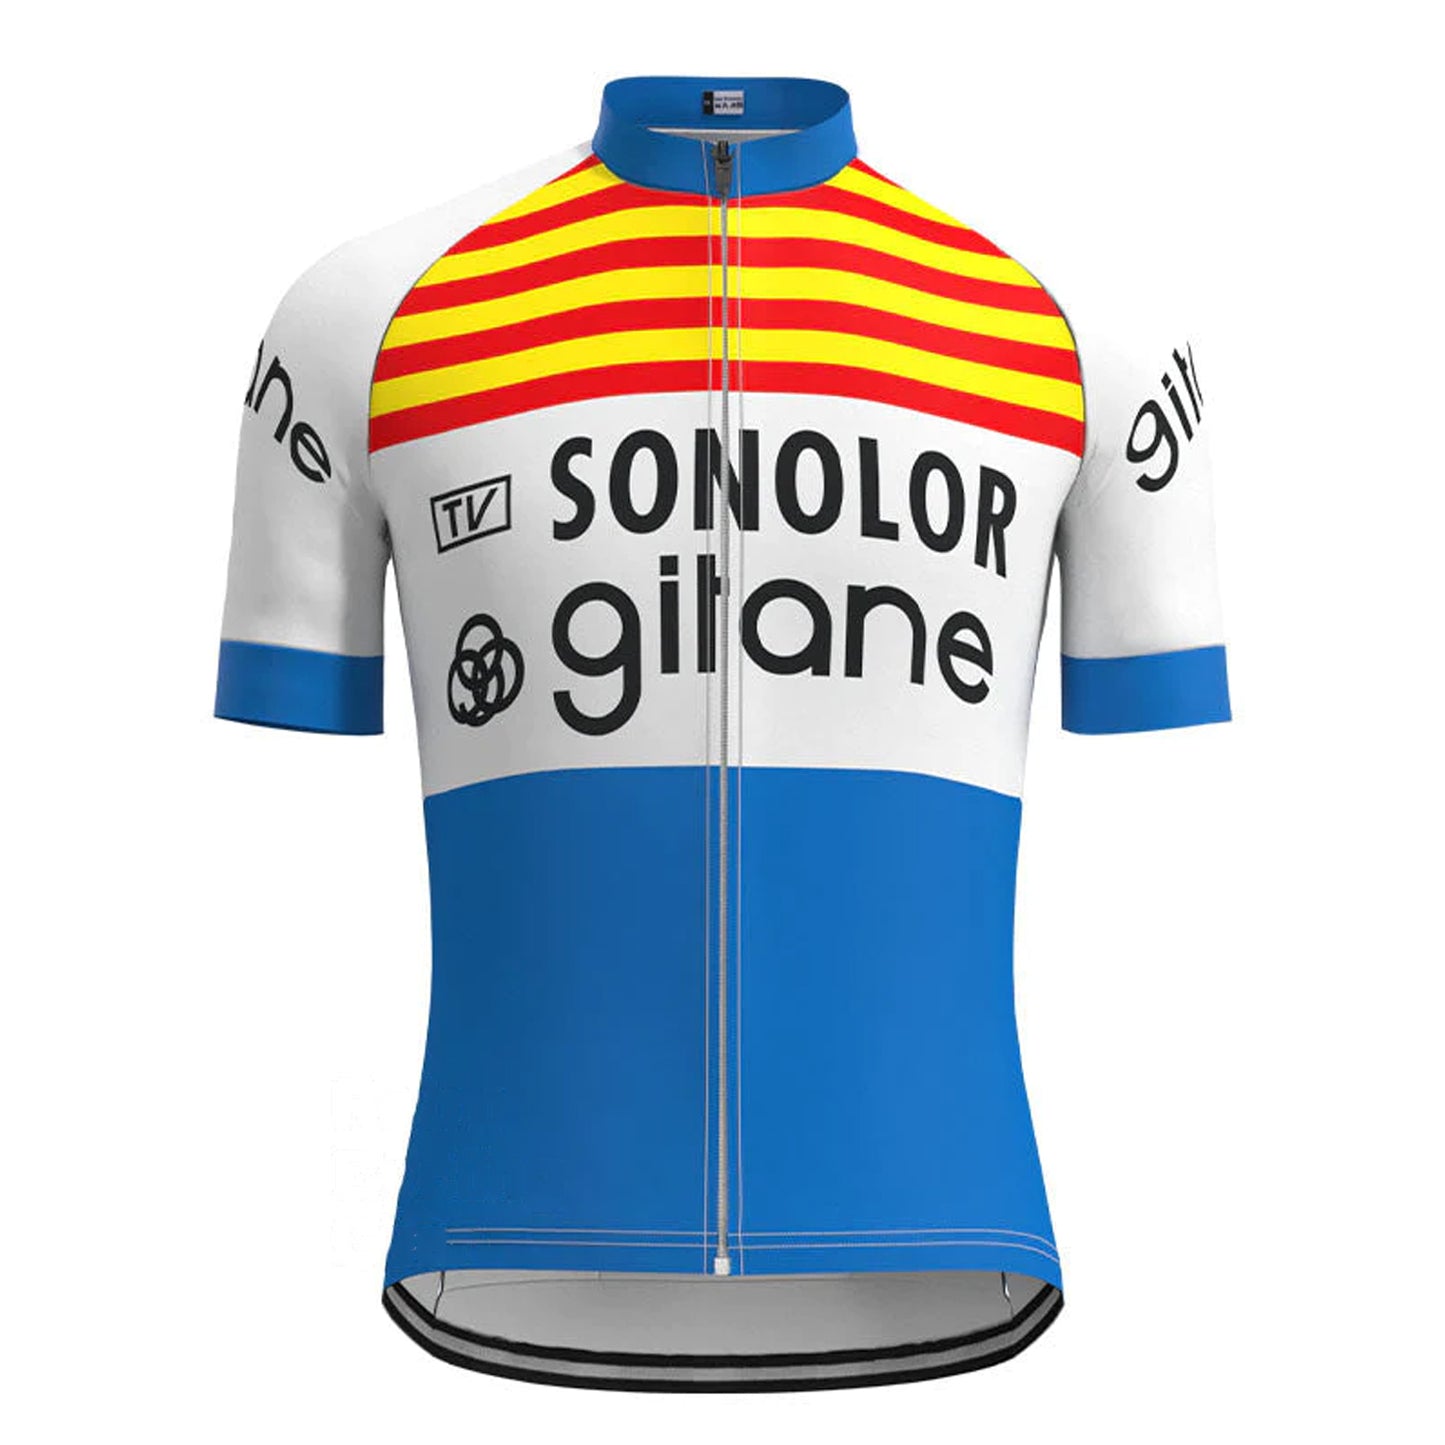 Sonolor Gitane White Vintage Short Sleeve Cycling Jersey Top